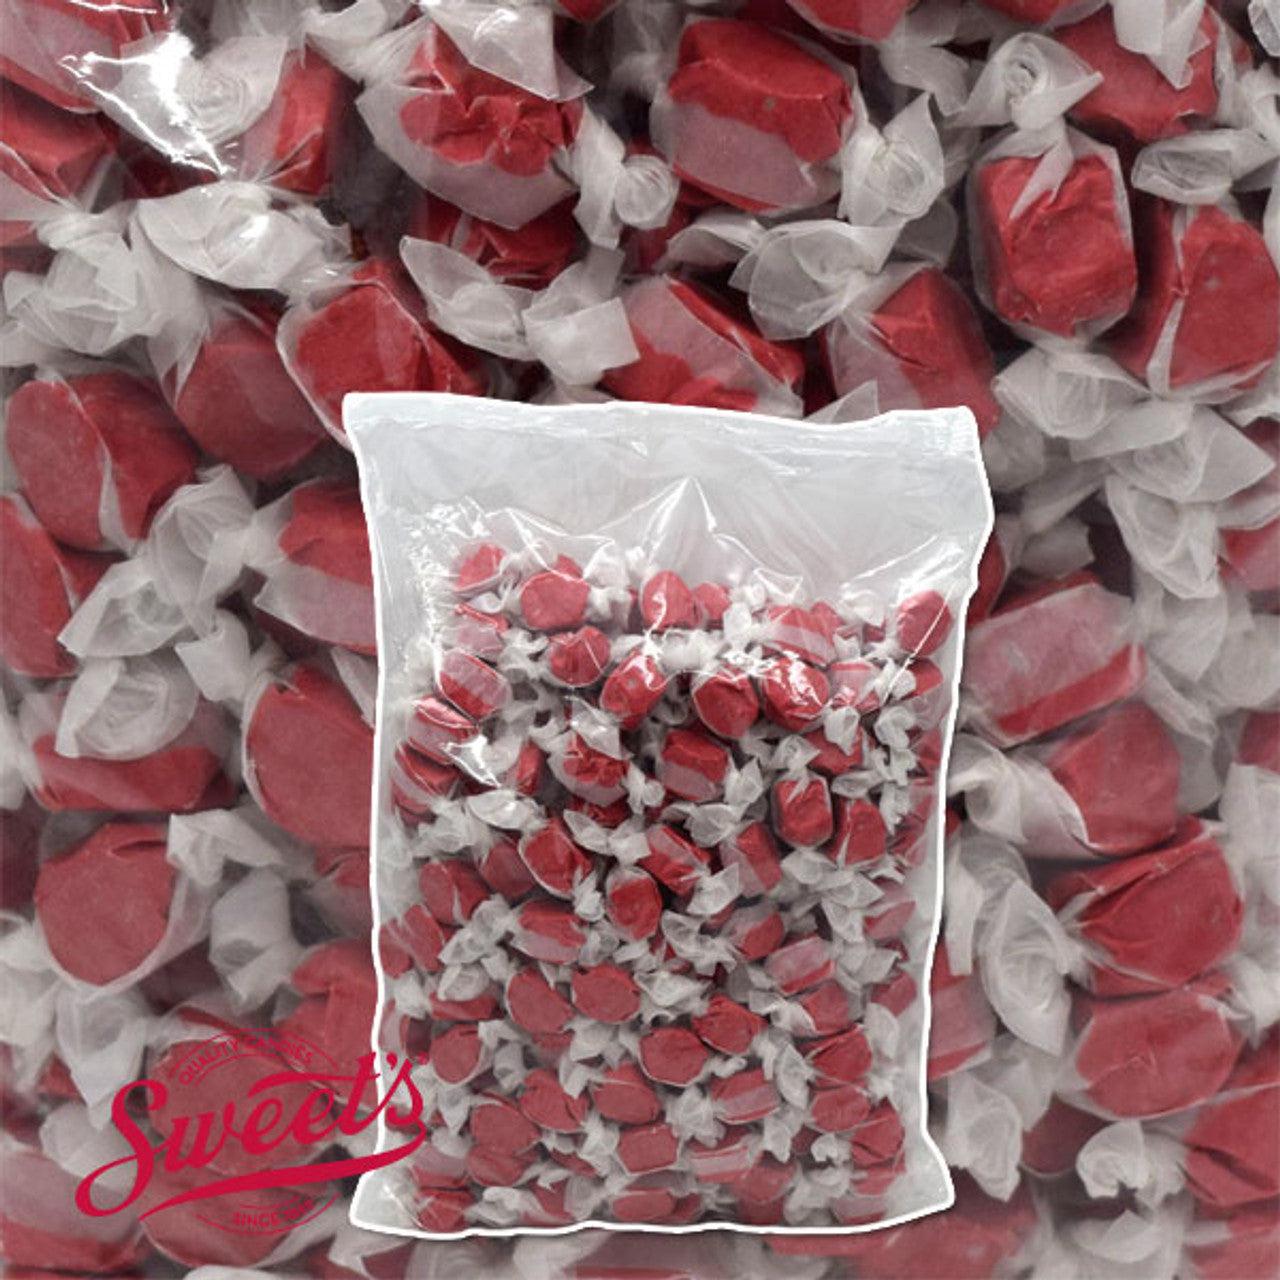 Sweets Salt Water Taffy Red Licorice 3 Pound Bag